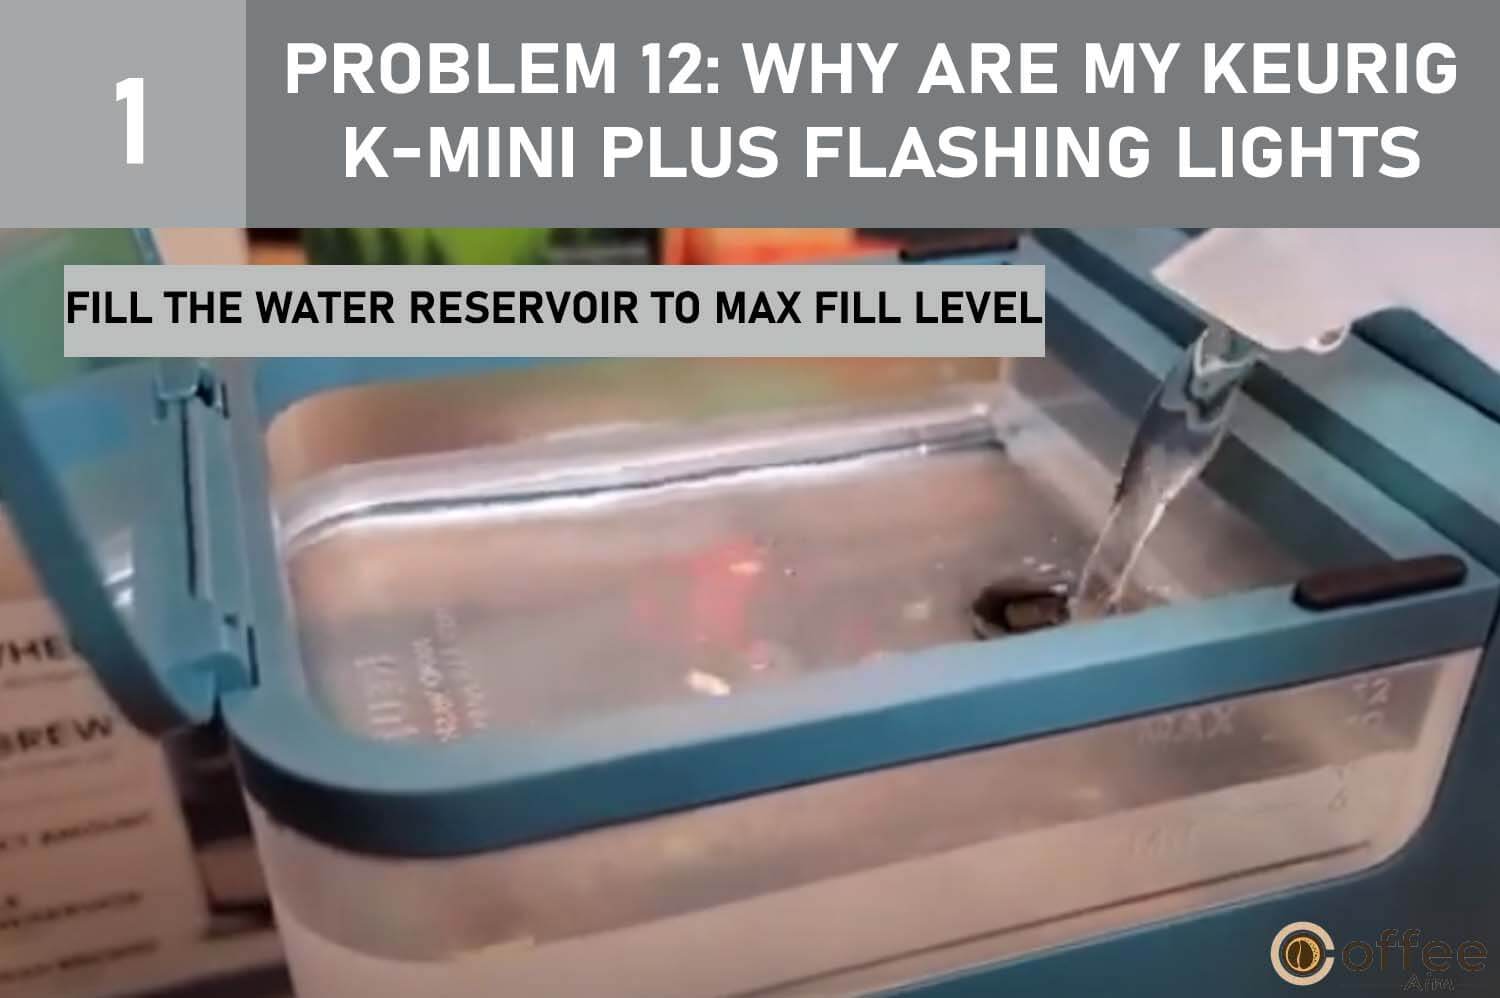 This image provides instructions on how to "Fill the Water Reservoir to Max Fill Level" as part of troubleshooting for the article "Keurig K-Mini Plus Problems: Why Are My Keurig K-Mini Plus Flashing Lights?"





